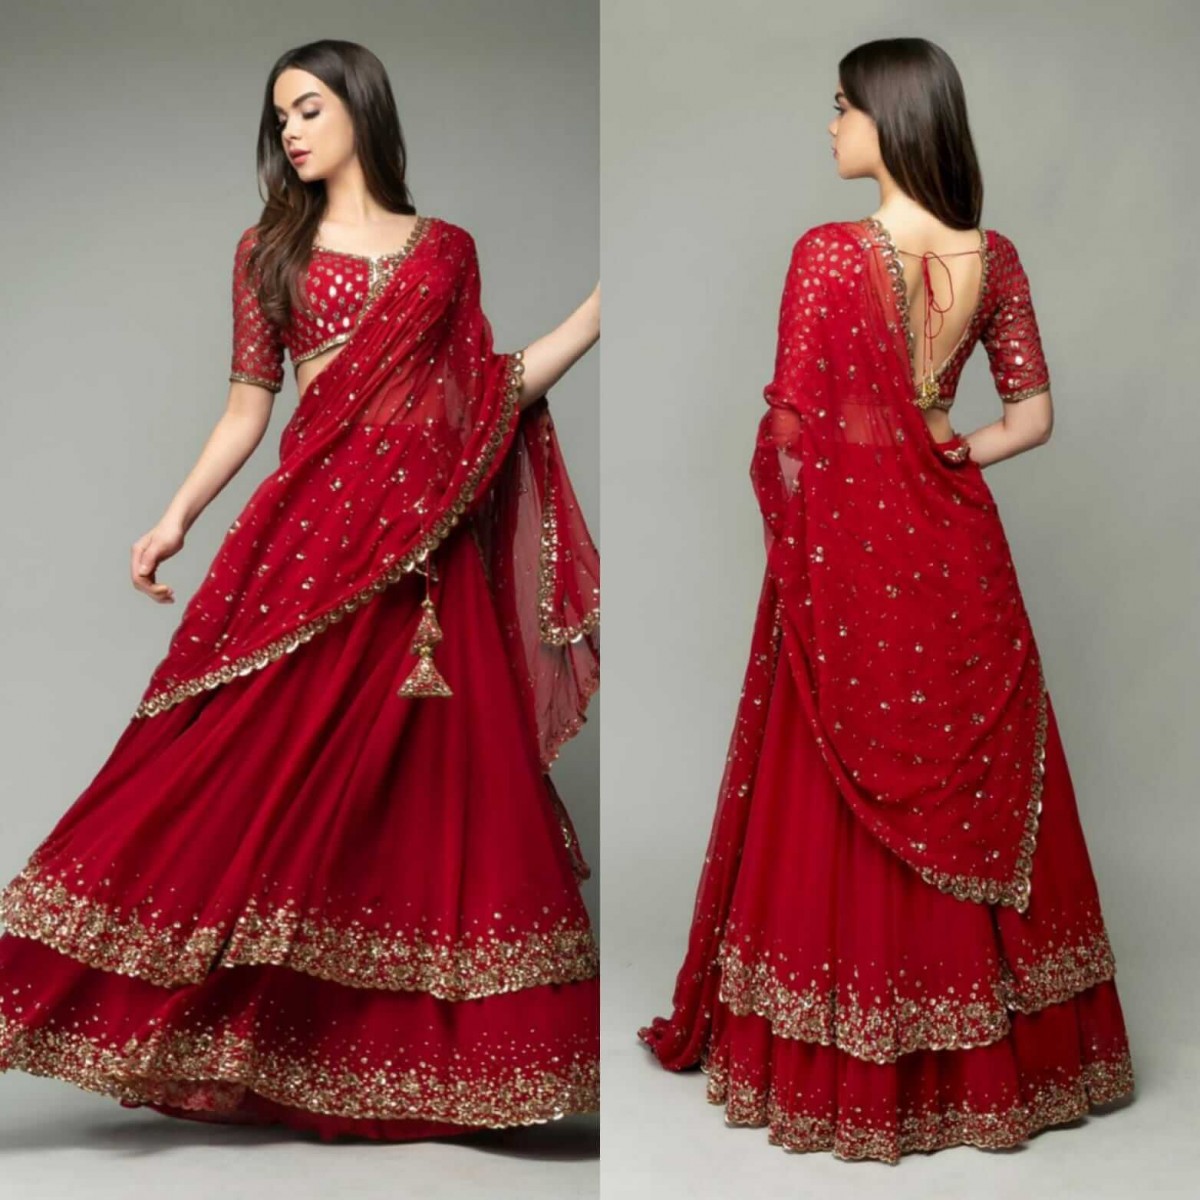 VALLBH CREATION Women's Rani Net Semi-Stitched Lehenga Choli With Can Can -  YeLeJao Discount offers and Shopping Deals